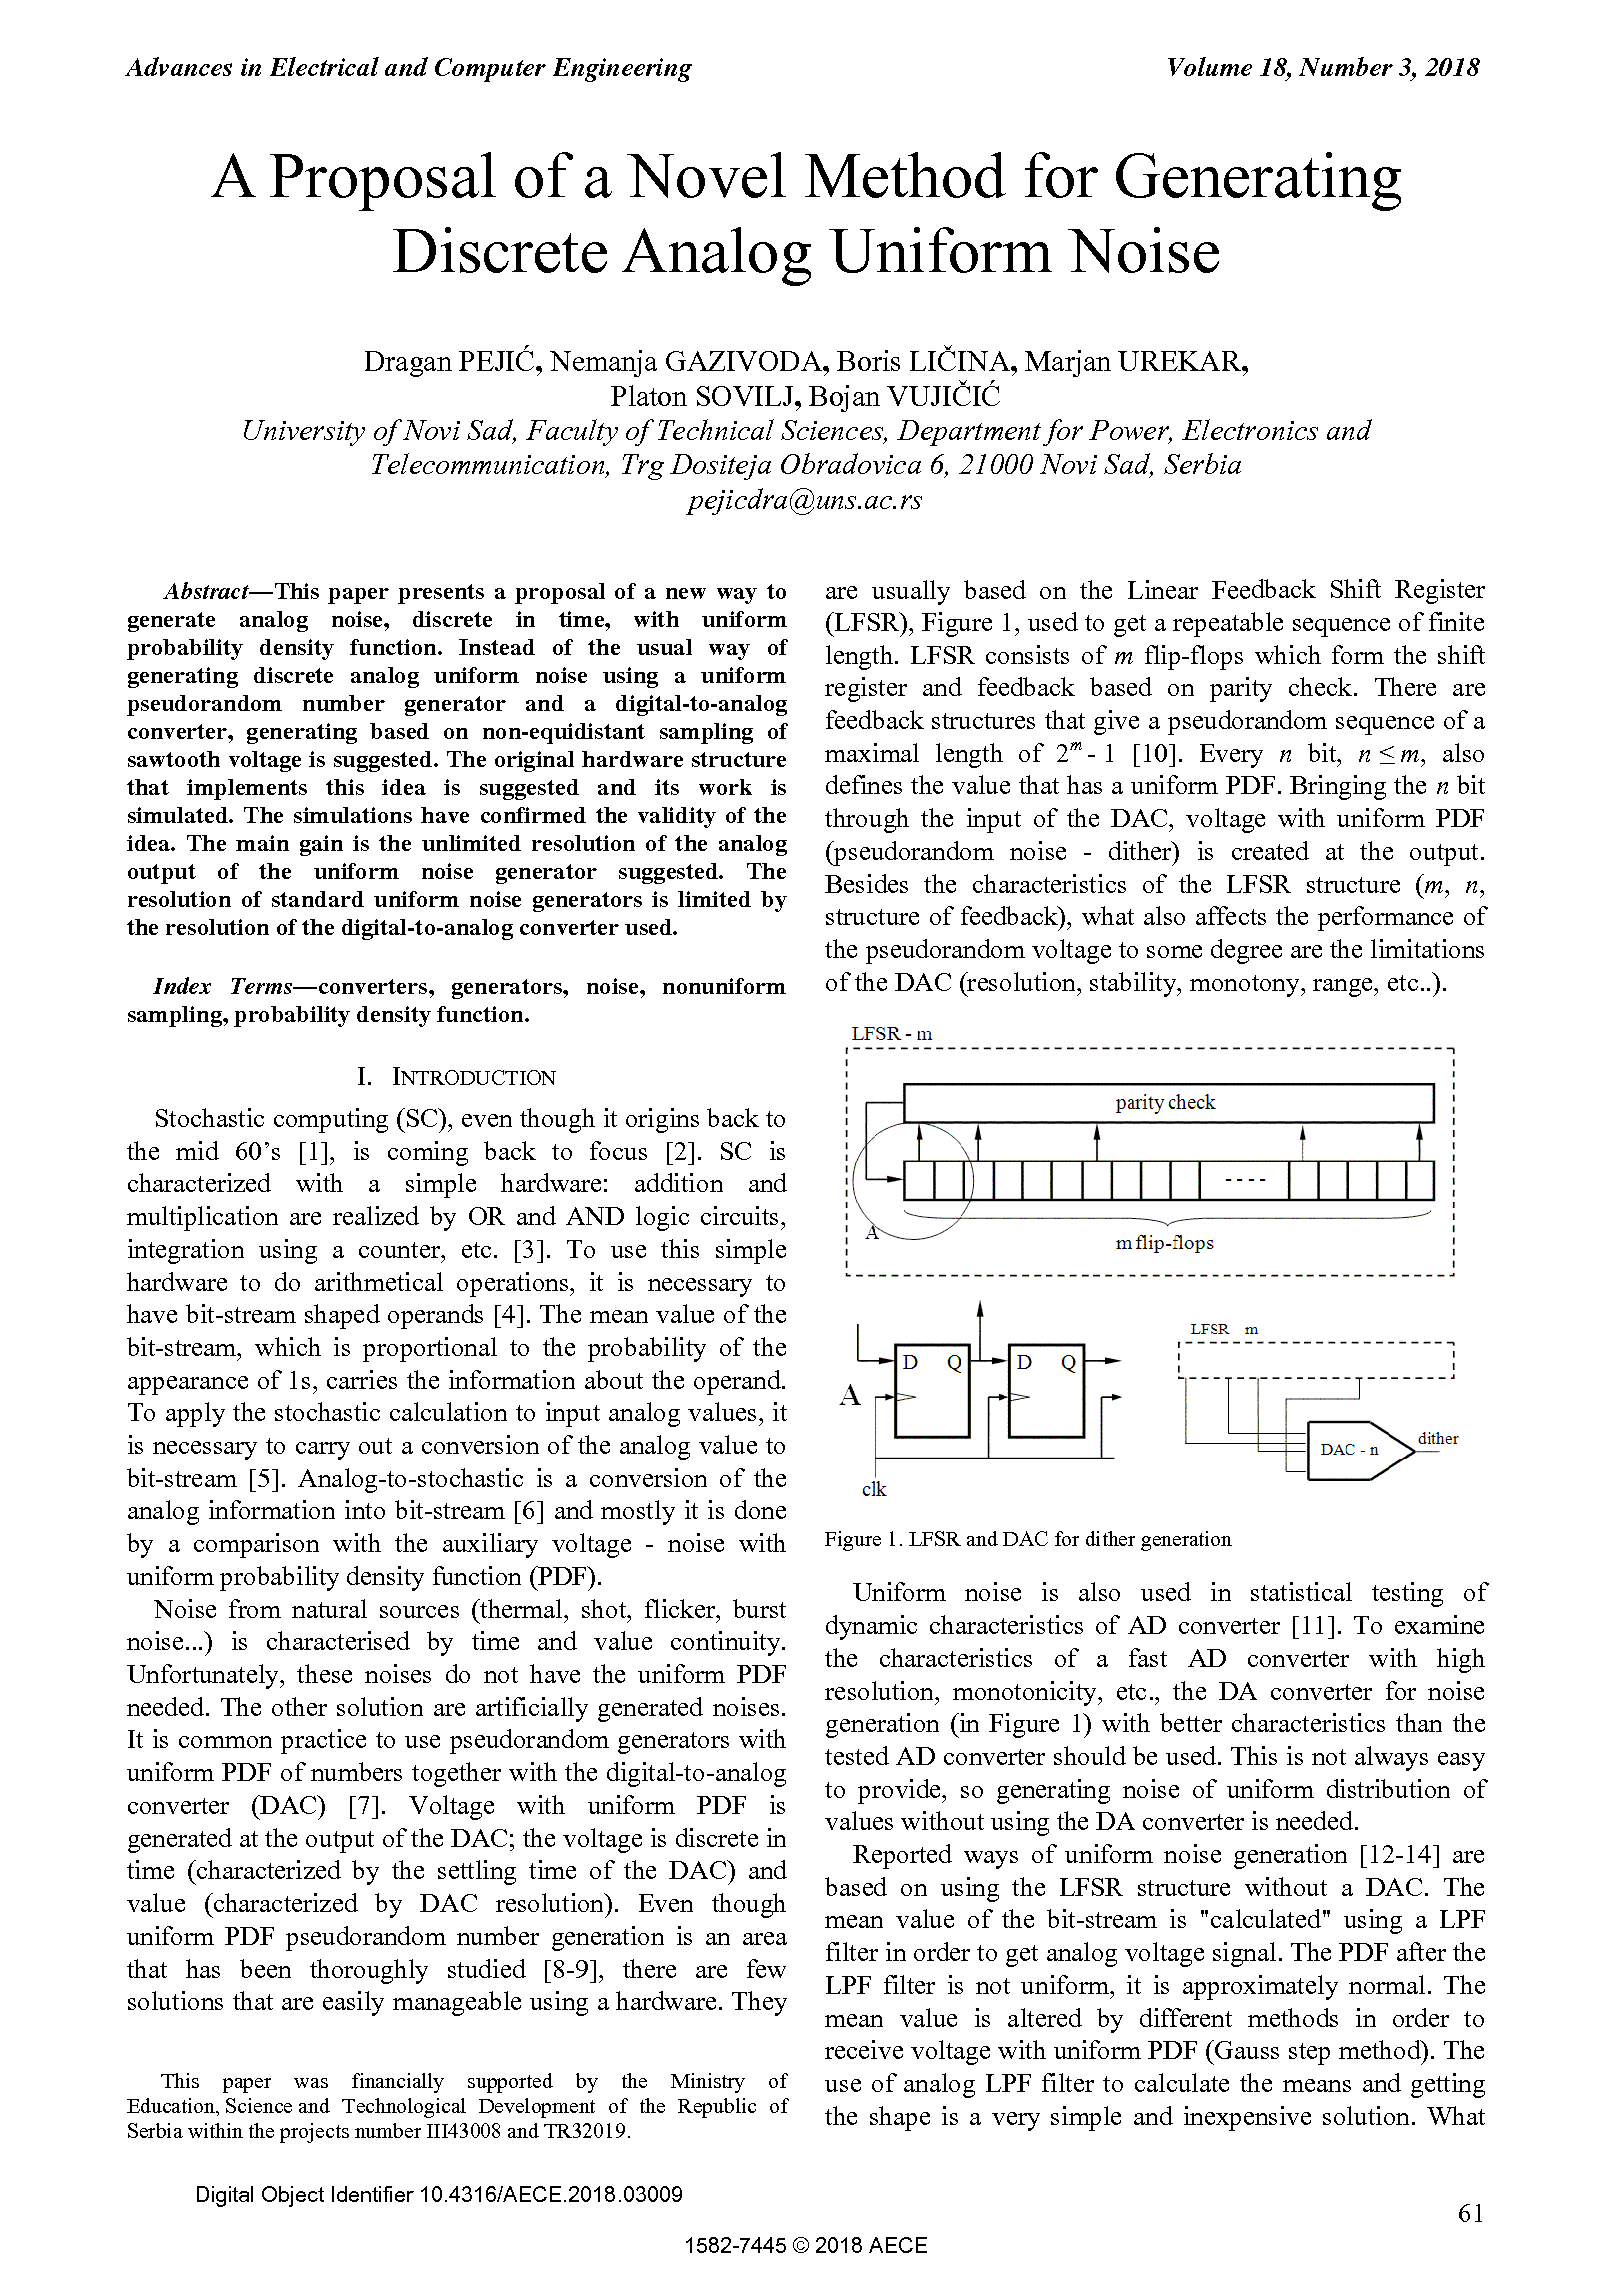 PDF Quickview for paper with DOI:10.4316/AECE.2018.03009